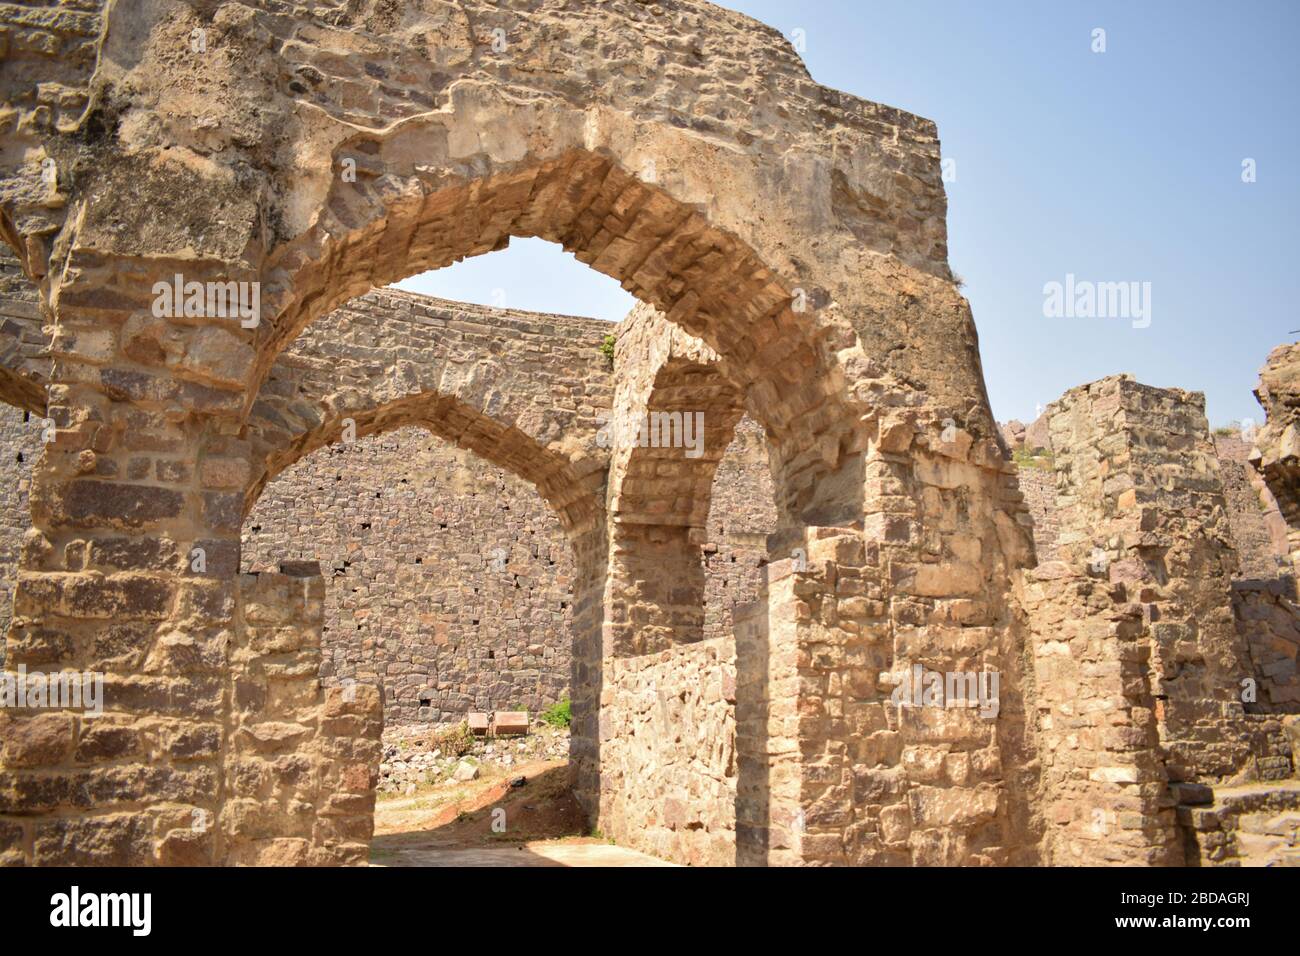 Old Historical Golconda Fort Ruined Walls in India Hintergrundfoto Stockfoto